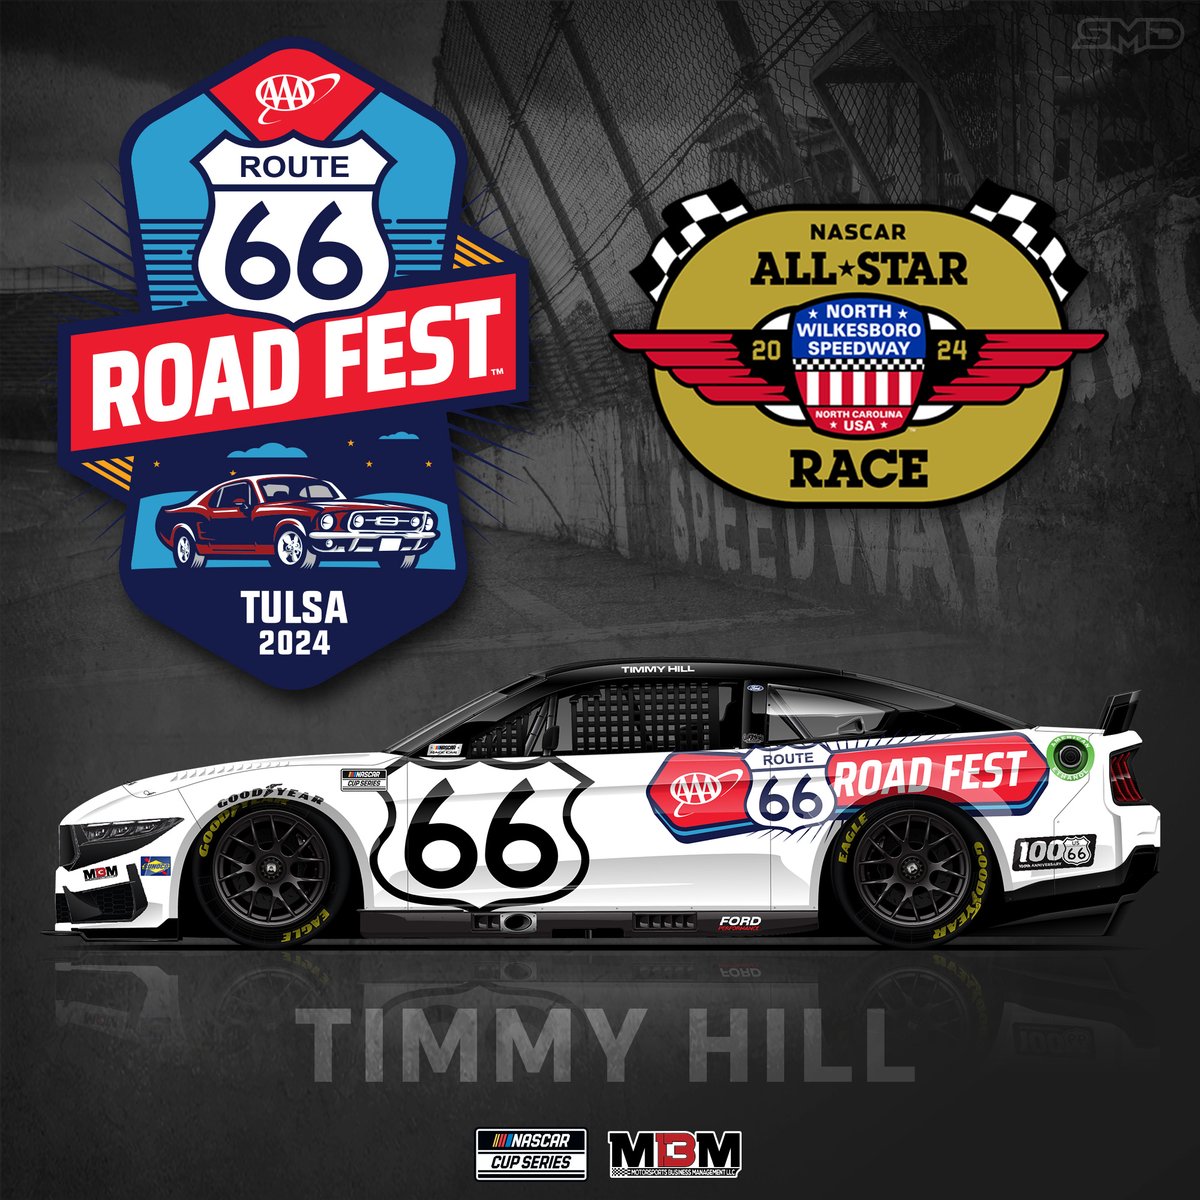 Route 66 🤝 NASCAR Team 66 MBM & @TimmyHillRacer are thrilled to be celebrating this American icon, as AAA's @route66roadfest comes to Tulsa, OK on June 22-23. Fun for the whole family! READ: mbmmotorsports.com/aaa-mbm-celebr… #NASCAR #AllStar #Route66 #Route66RoadFest #RT66JourneyTo100